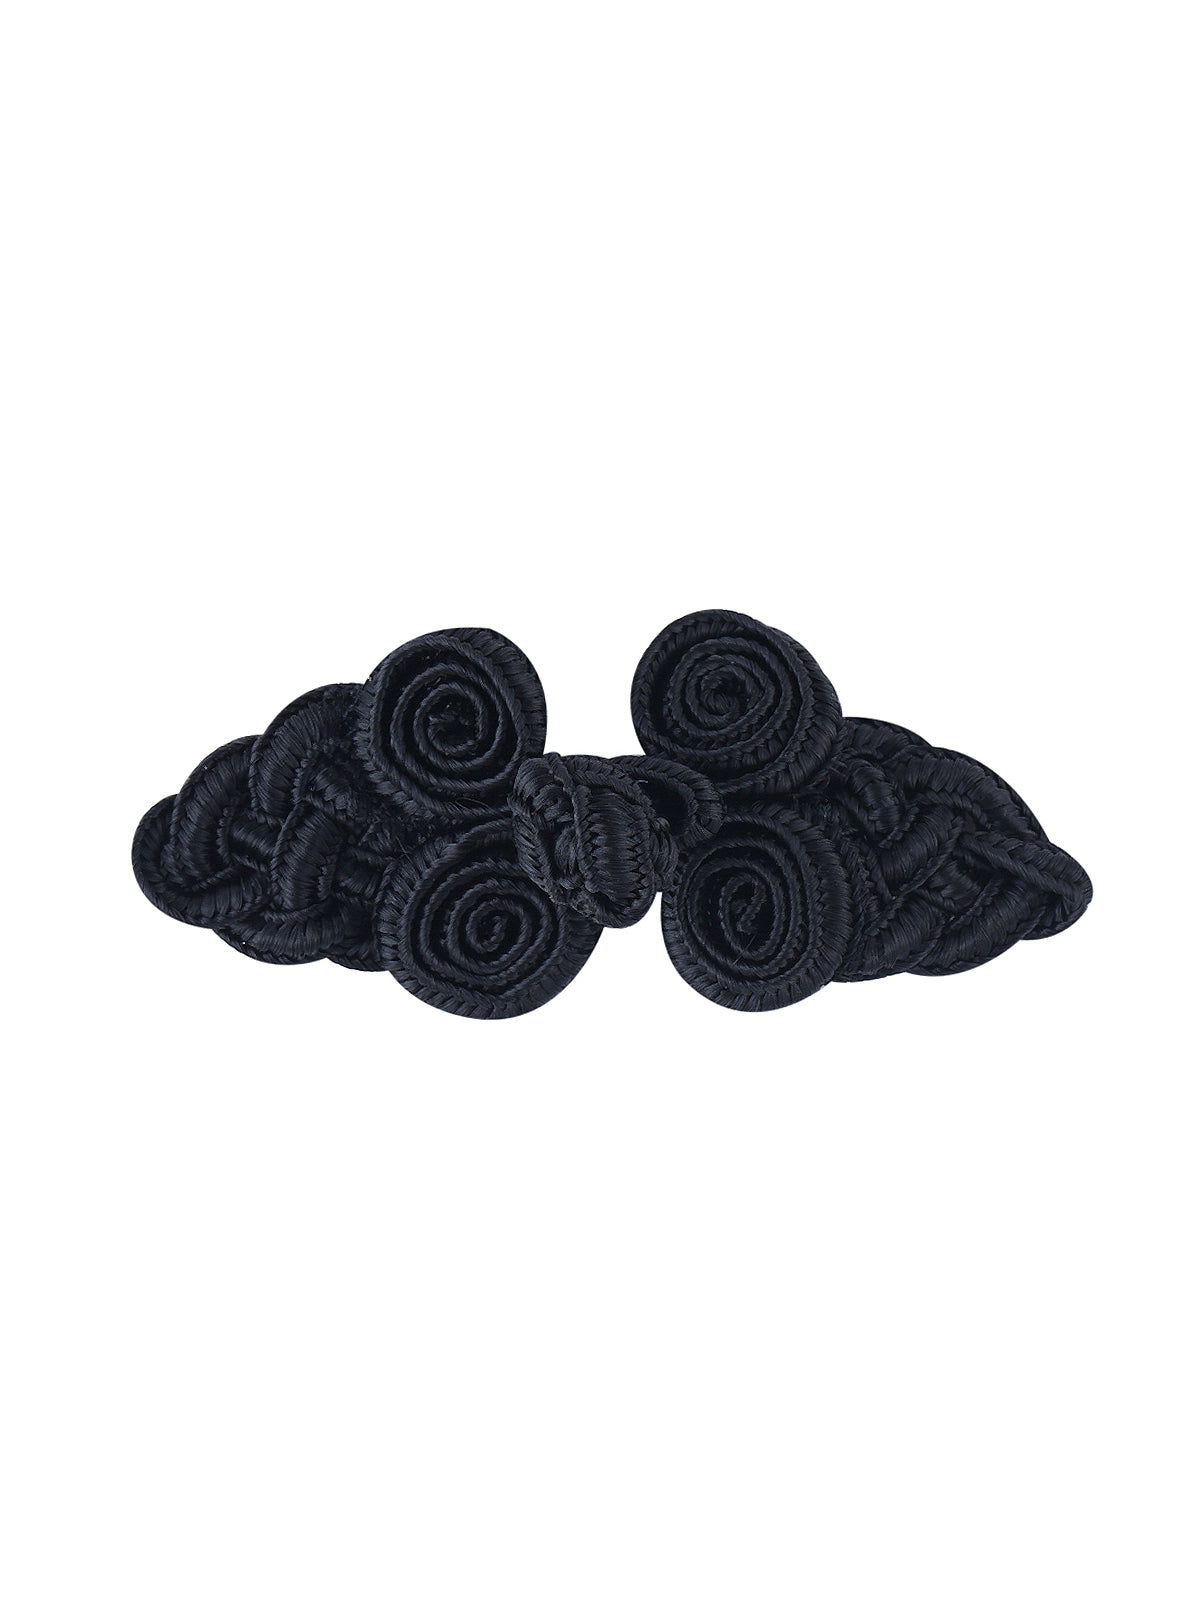 Sewing Fasteners Black & White Frog Knot Closure